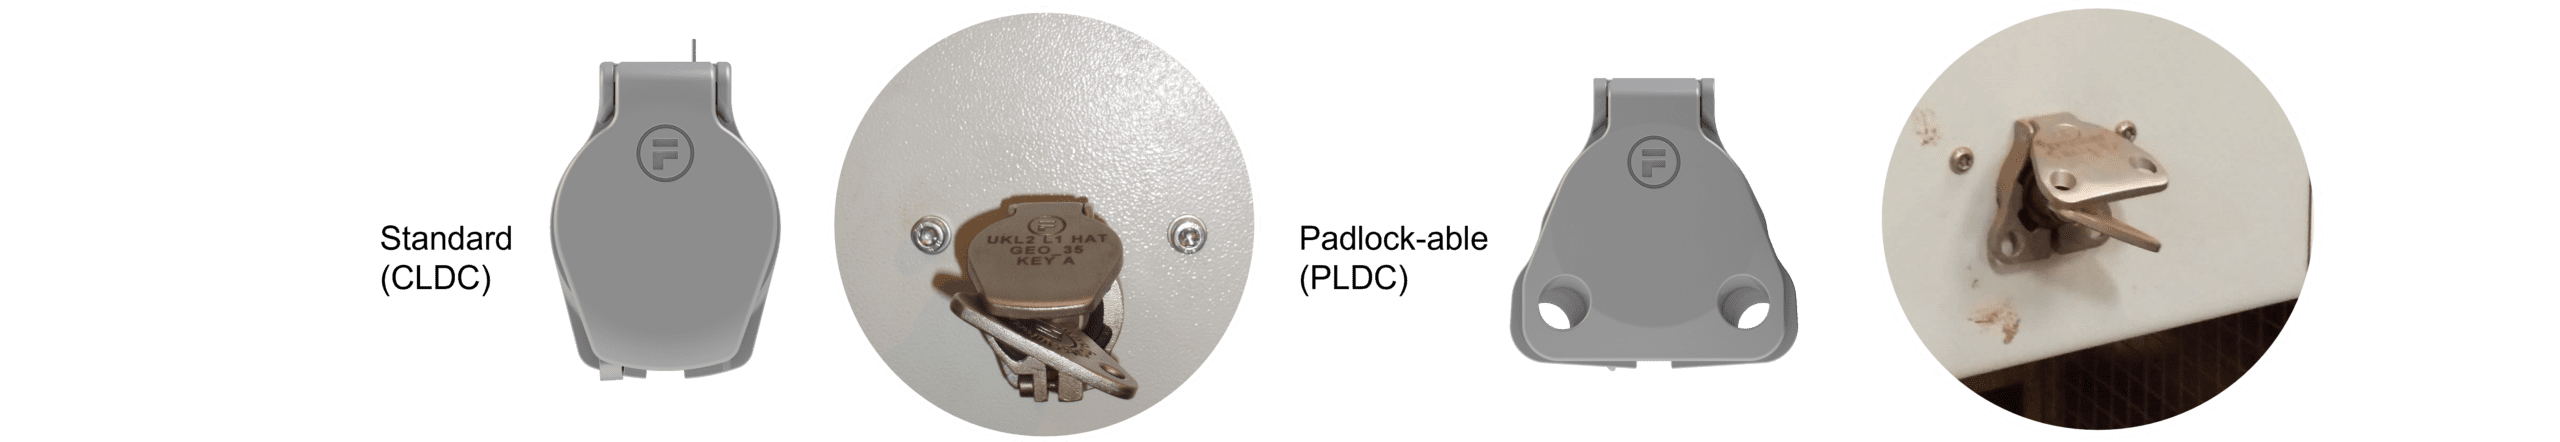 Solenoid Key Switch with Dust Cover Protection